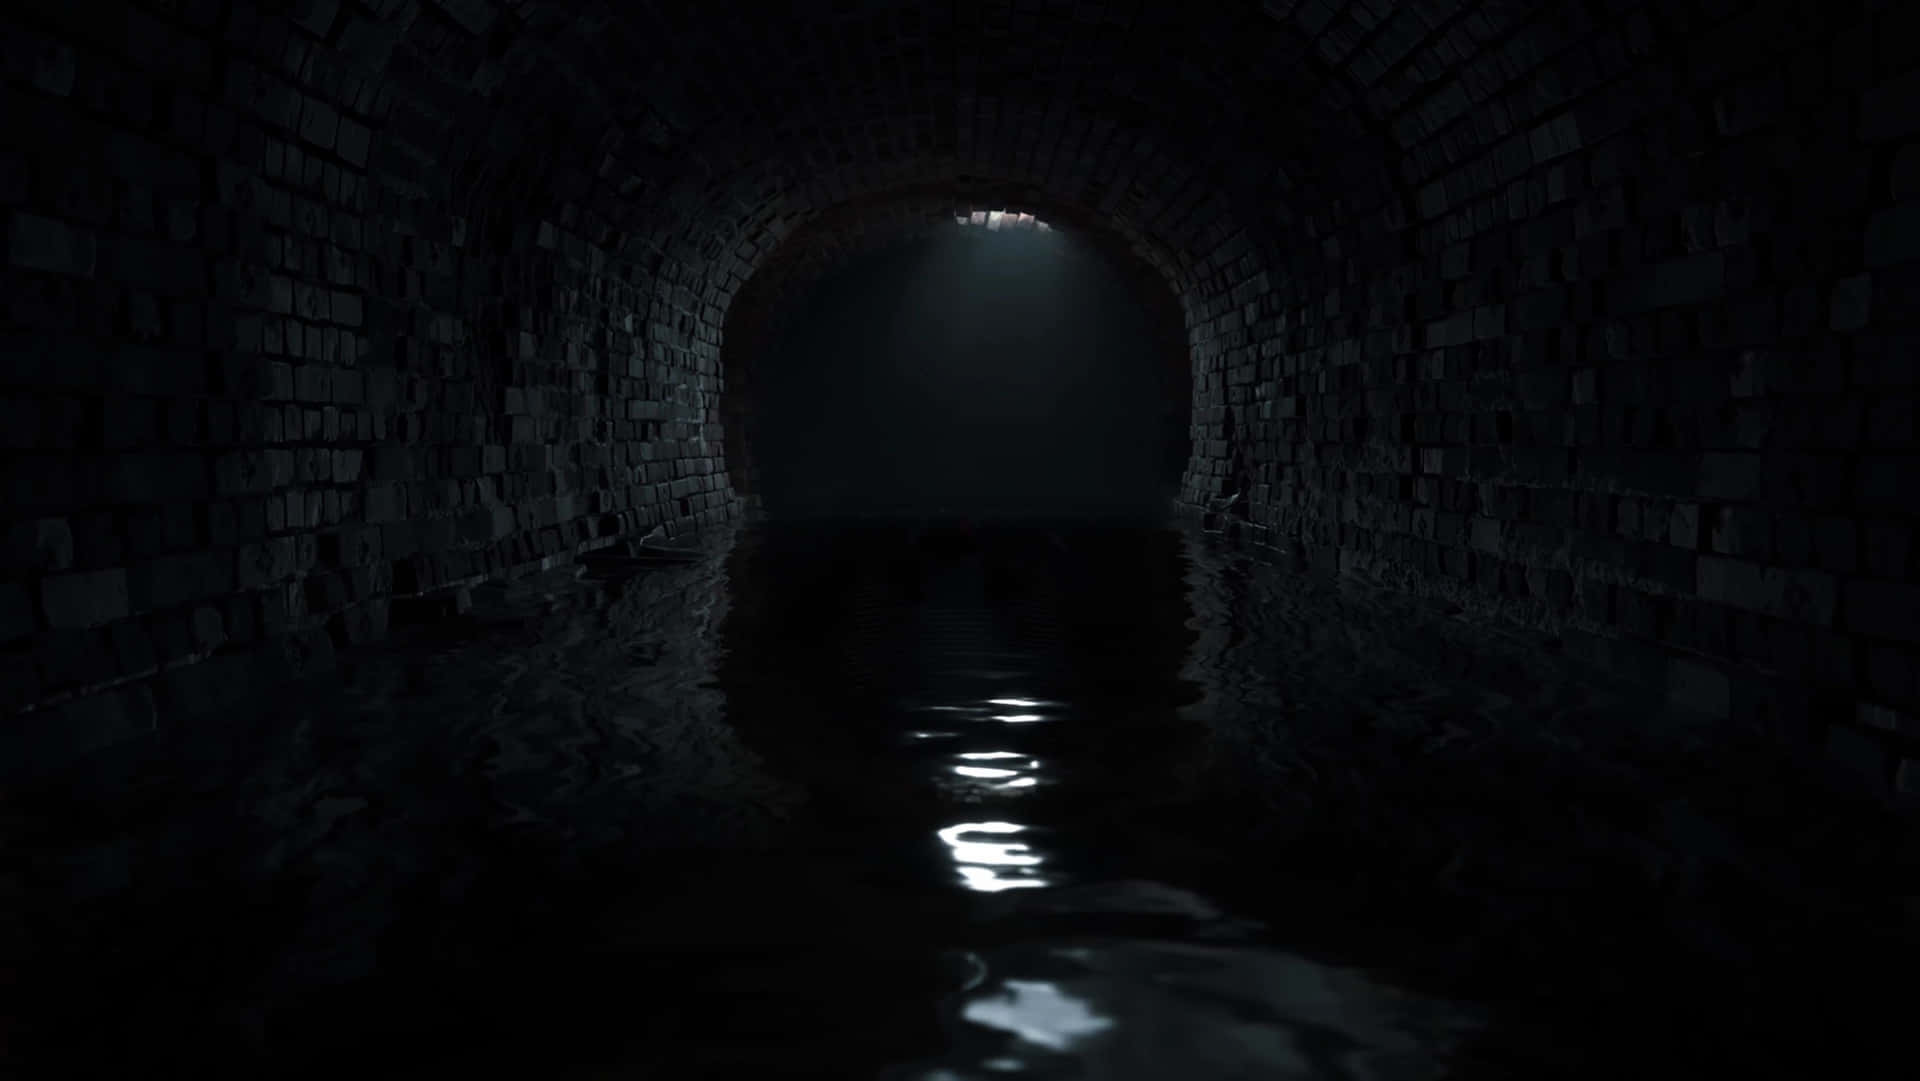 A Dark Tunnel With Water And Light Coming Through